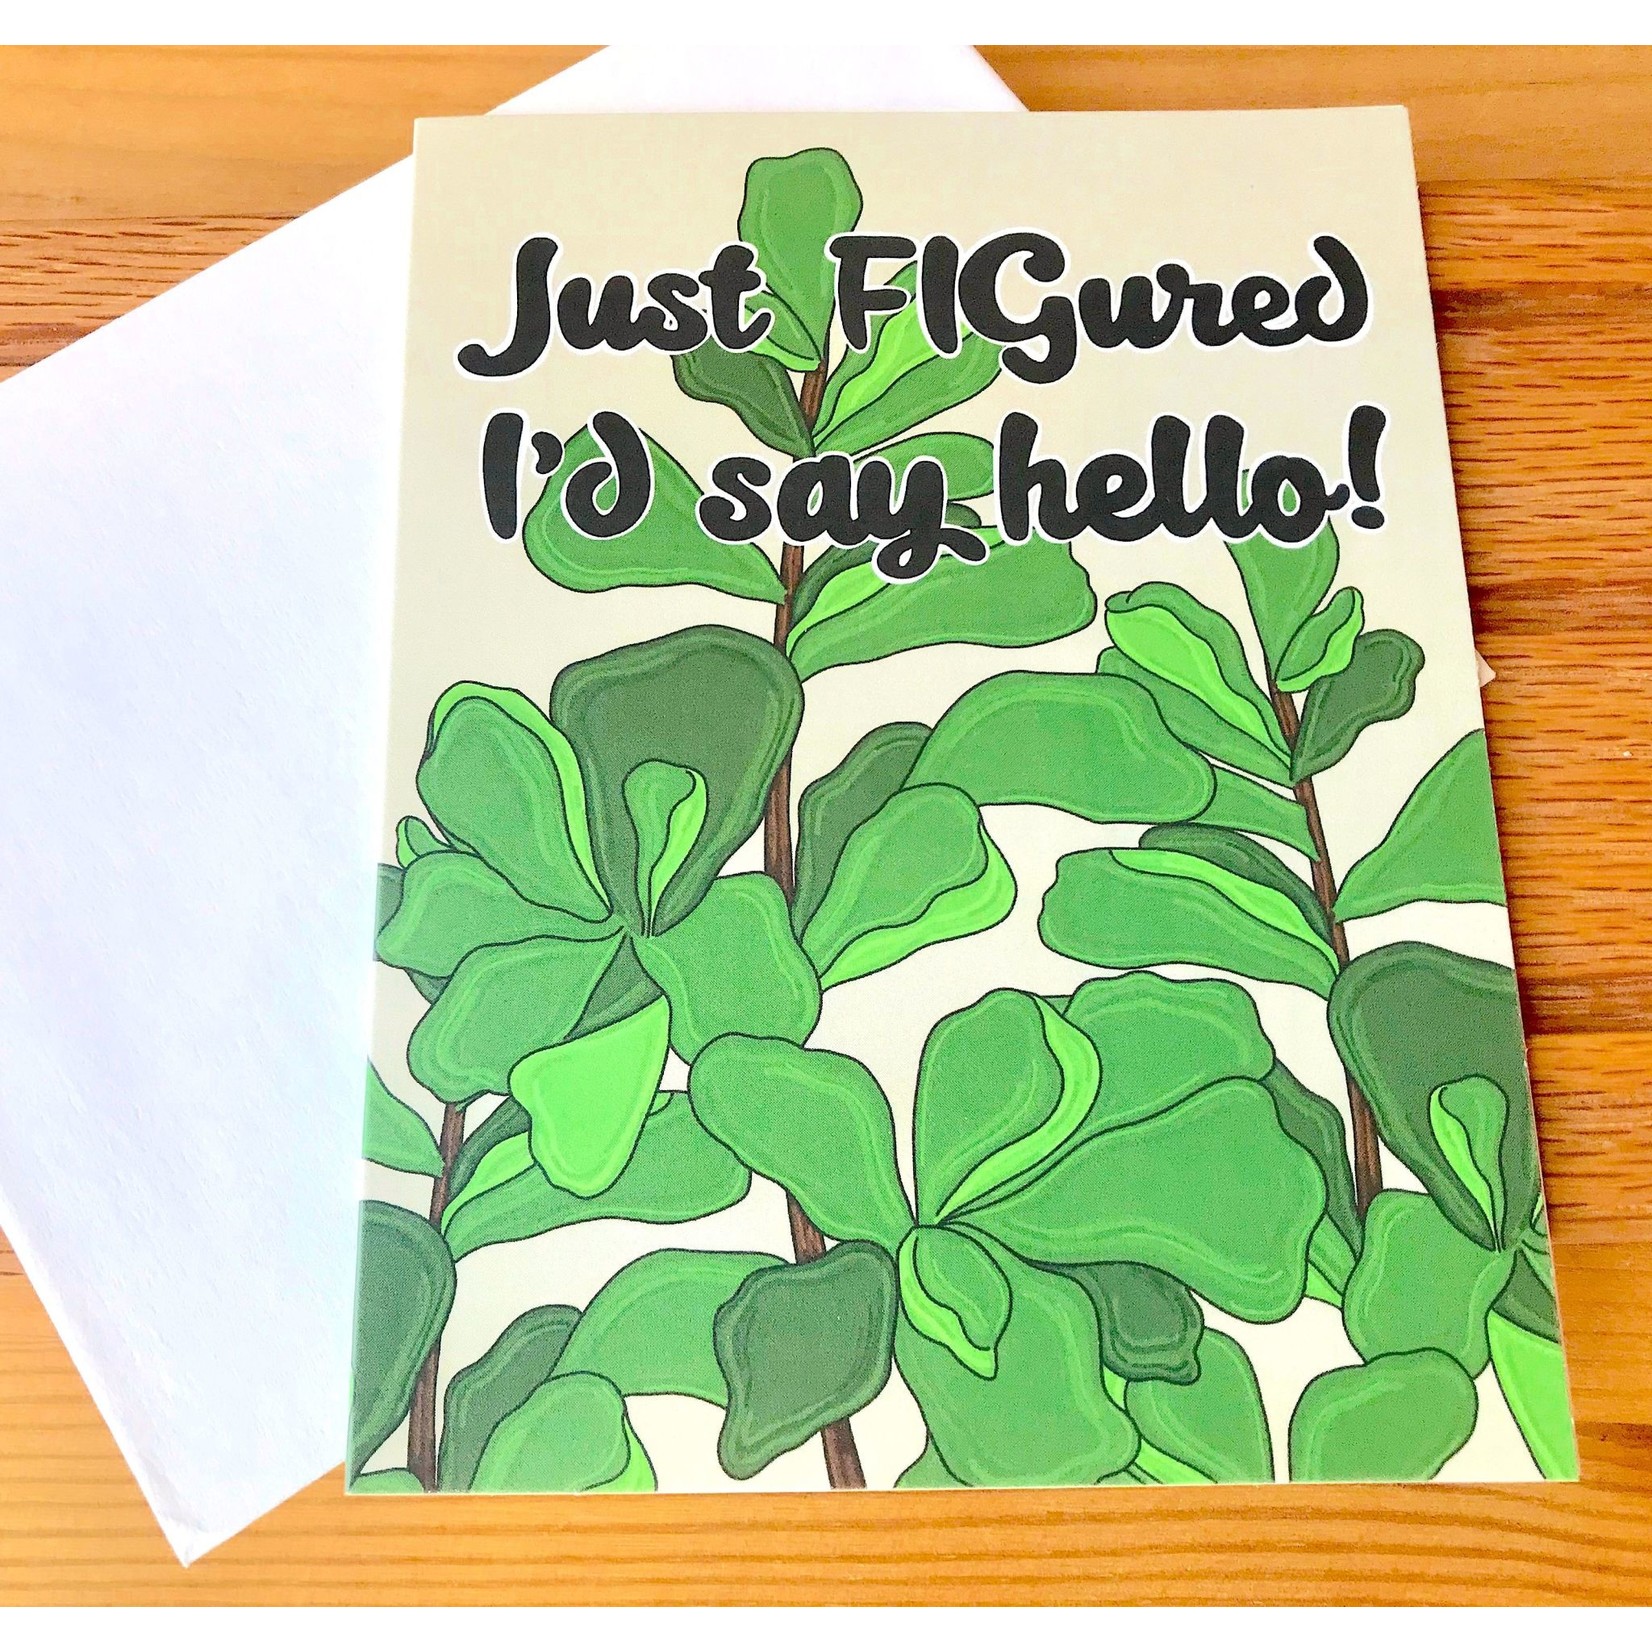 Fiber and Gloss / Whereabouts FIGured I'd Say Hello Greeting Card